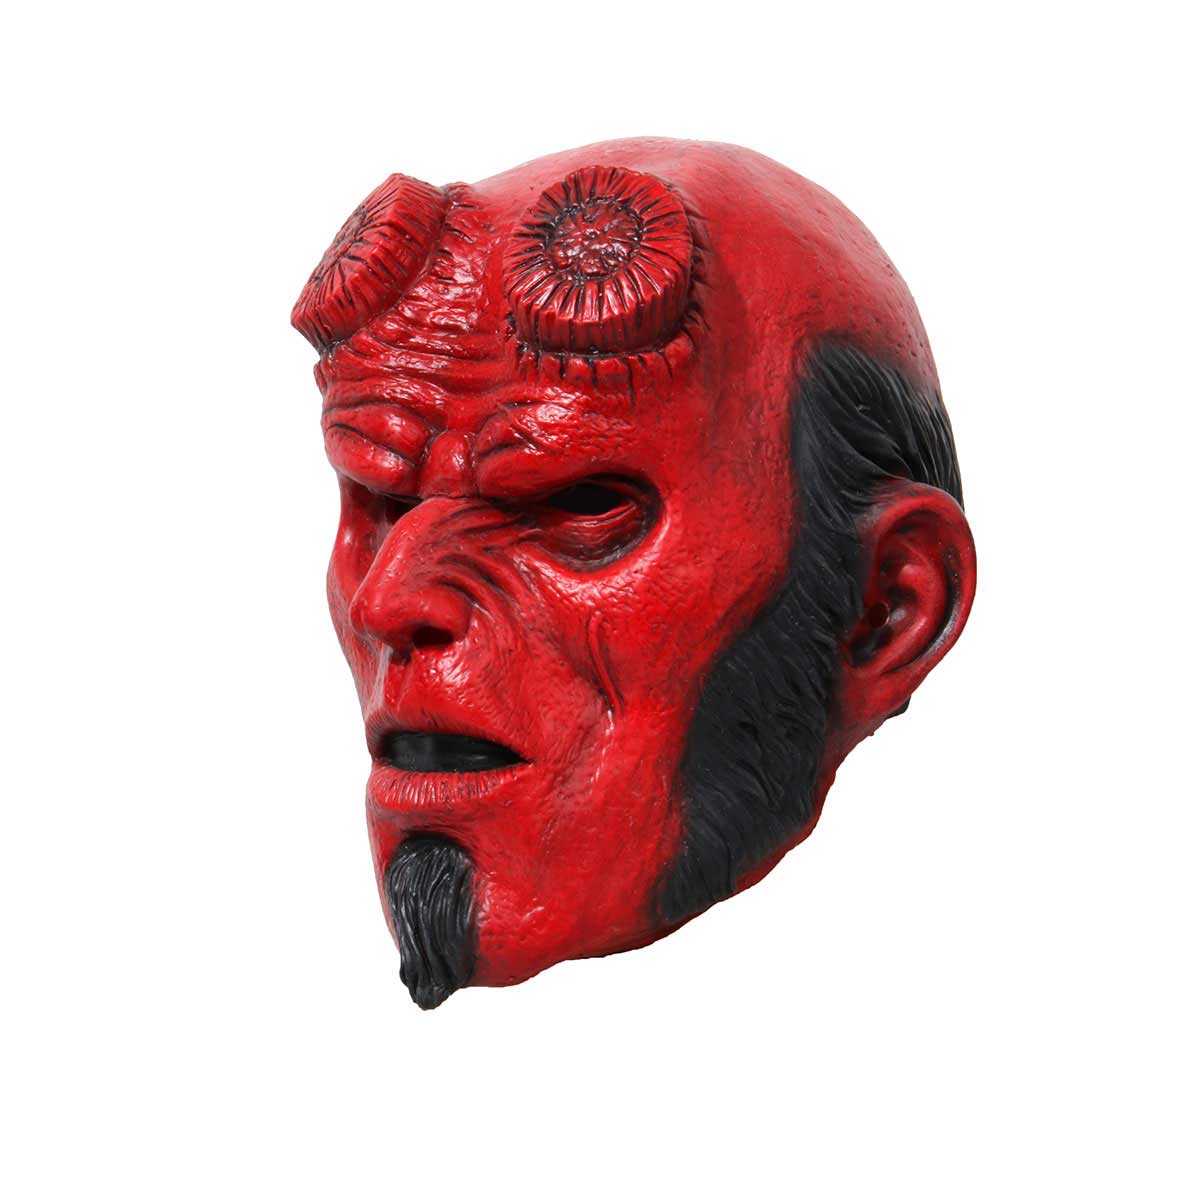 Masques d'Halloween enfer Baron latex Masque Party cosplay